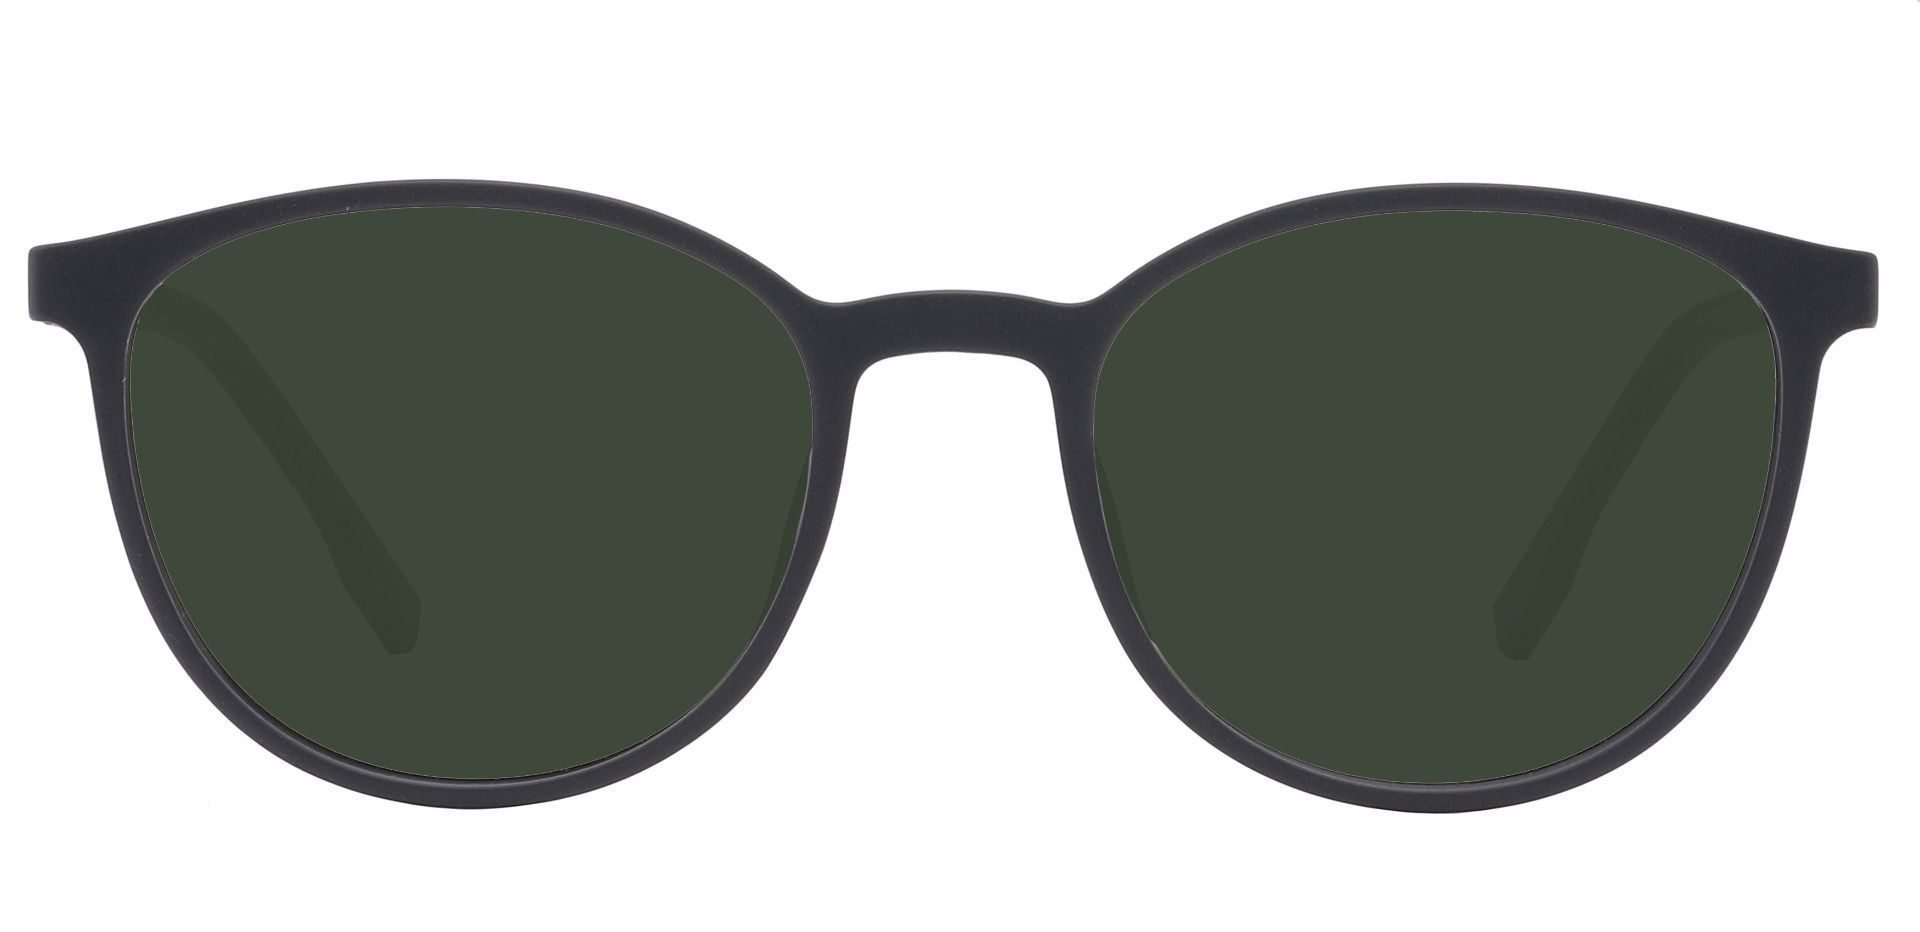 Bay Round Lined Bifocal Sunglasses - Black Frame With Green Lenses